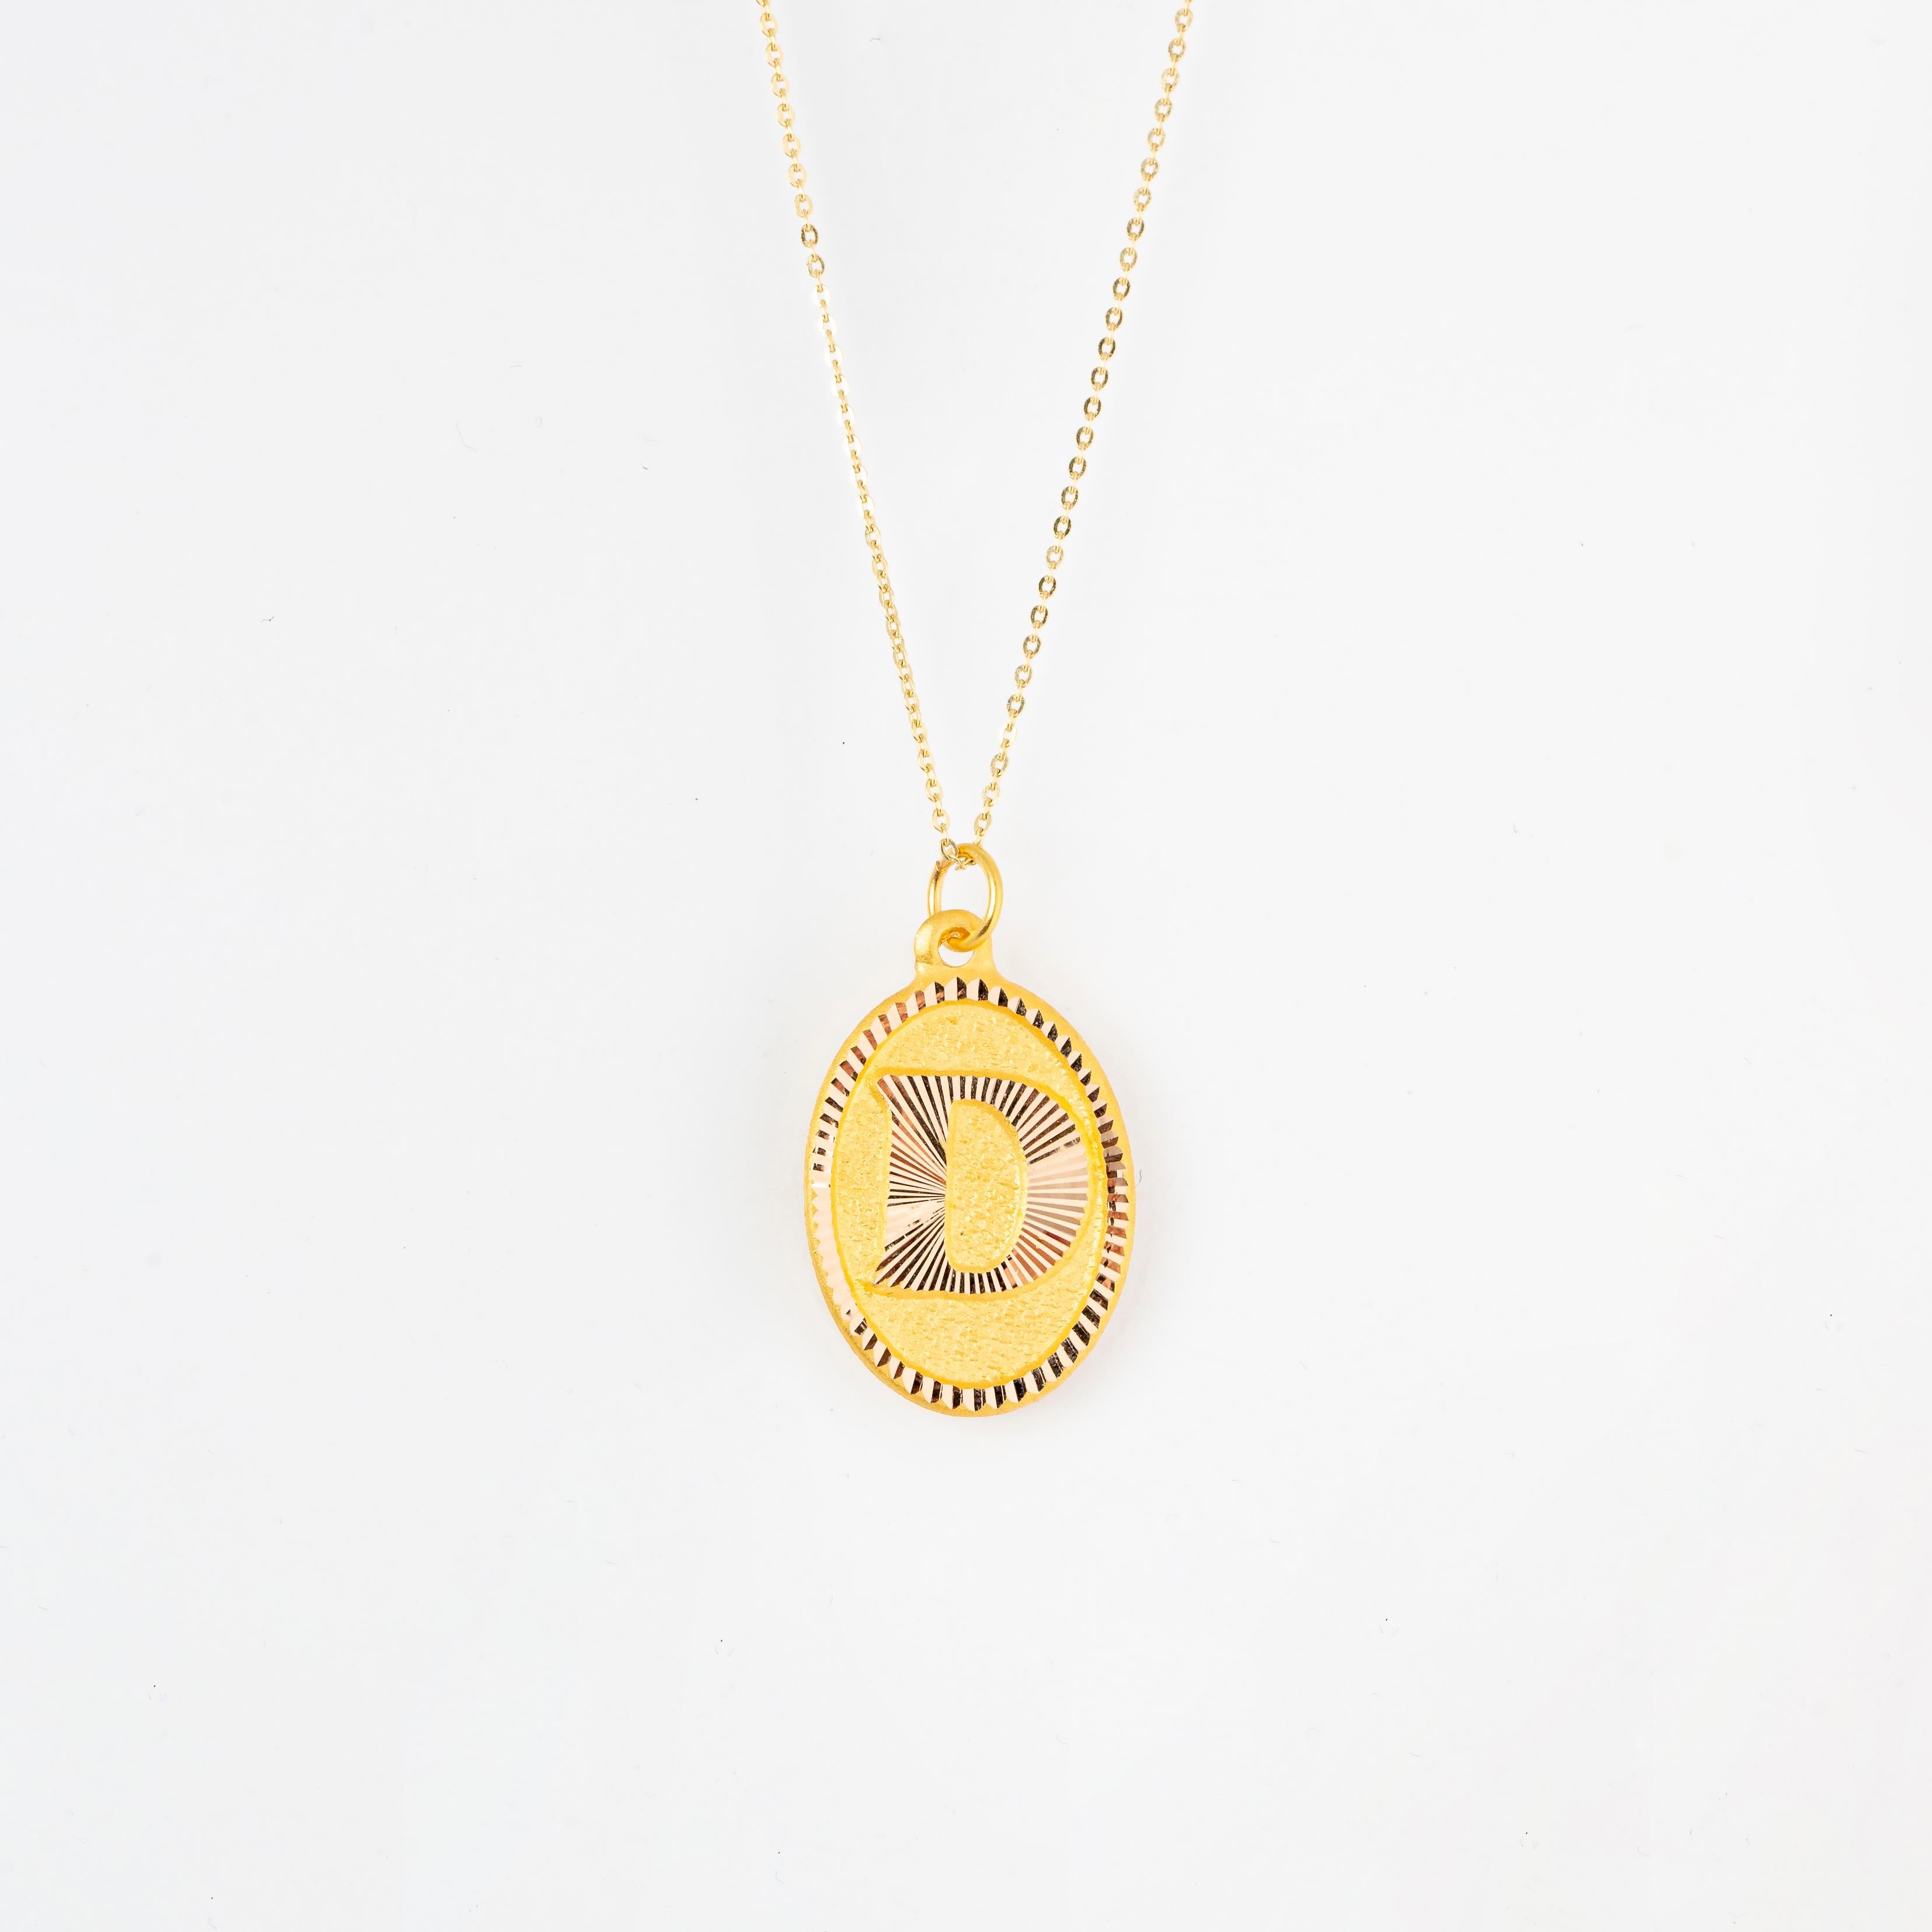 14K Gold Necklaces, Letter Necklace Models, Letter D Gold Necklace-Gift Necklace Models, Daily Necklaces, Letter Jewelry

It's a manual labor product. 'Handmade'. Fashionable product.

This necklace was made with quality materials and excellent